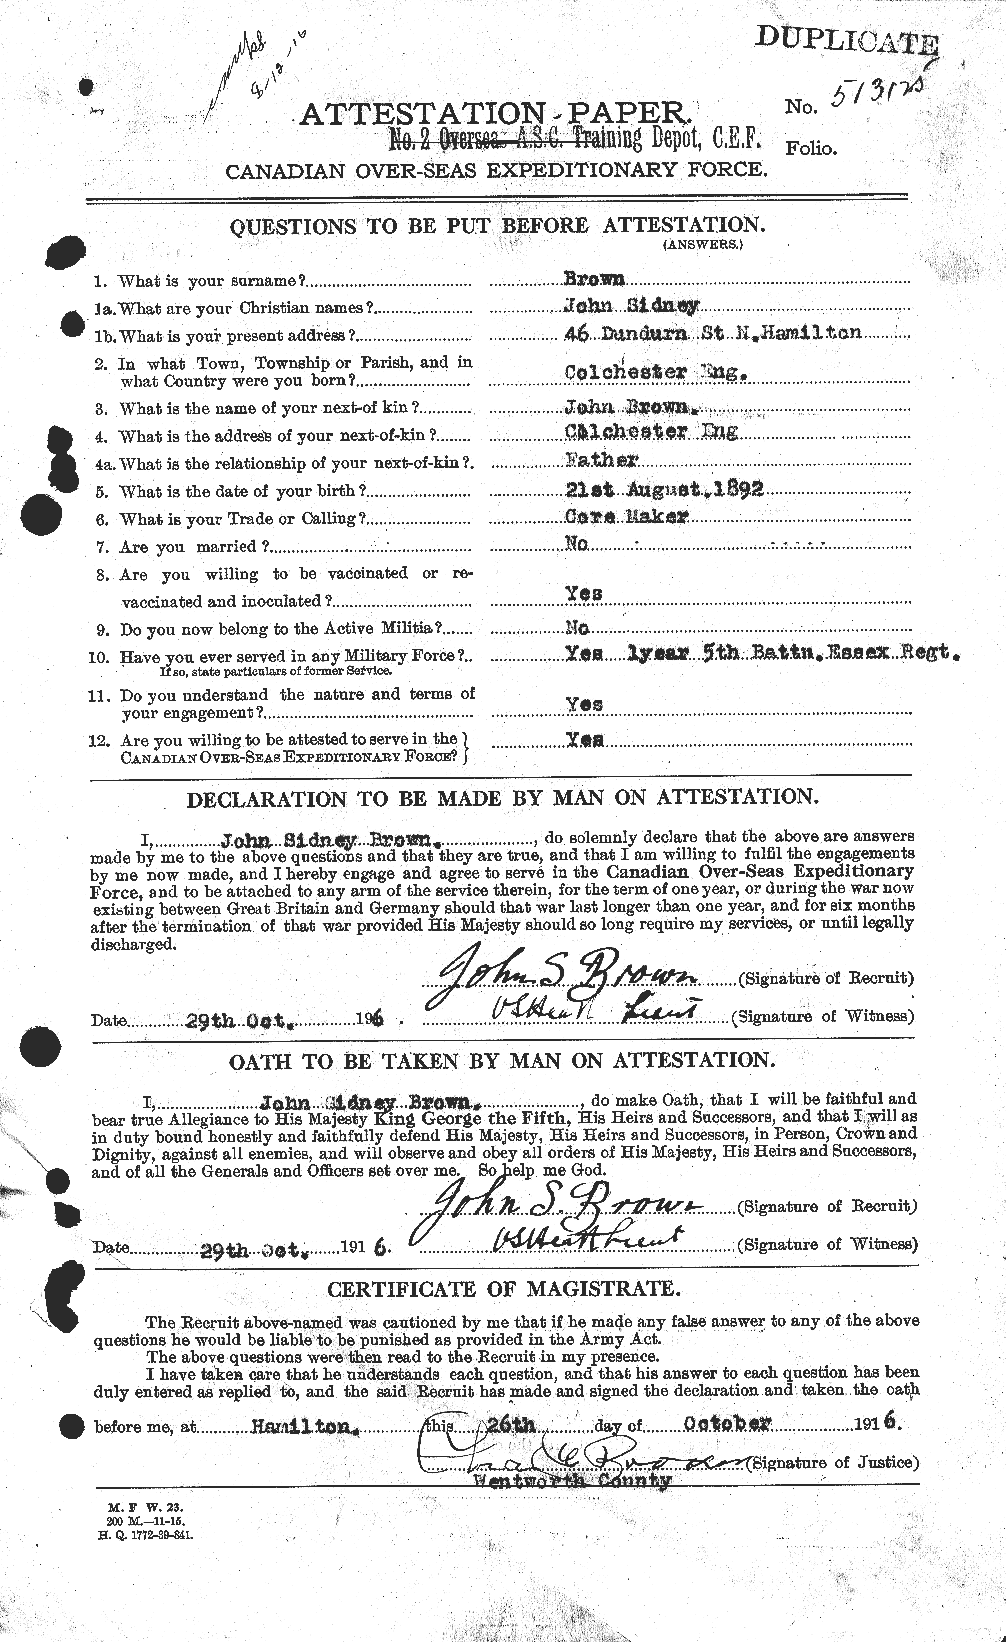 Personnel Records of the First World War - CEF 265870a